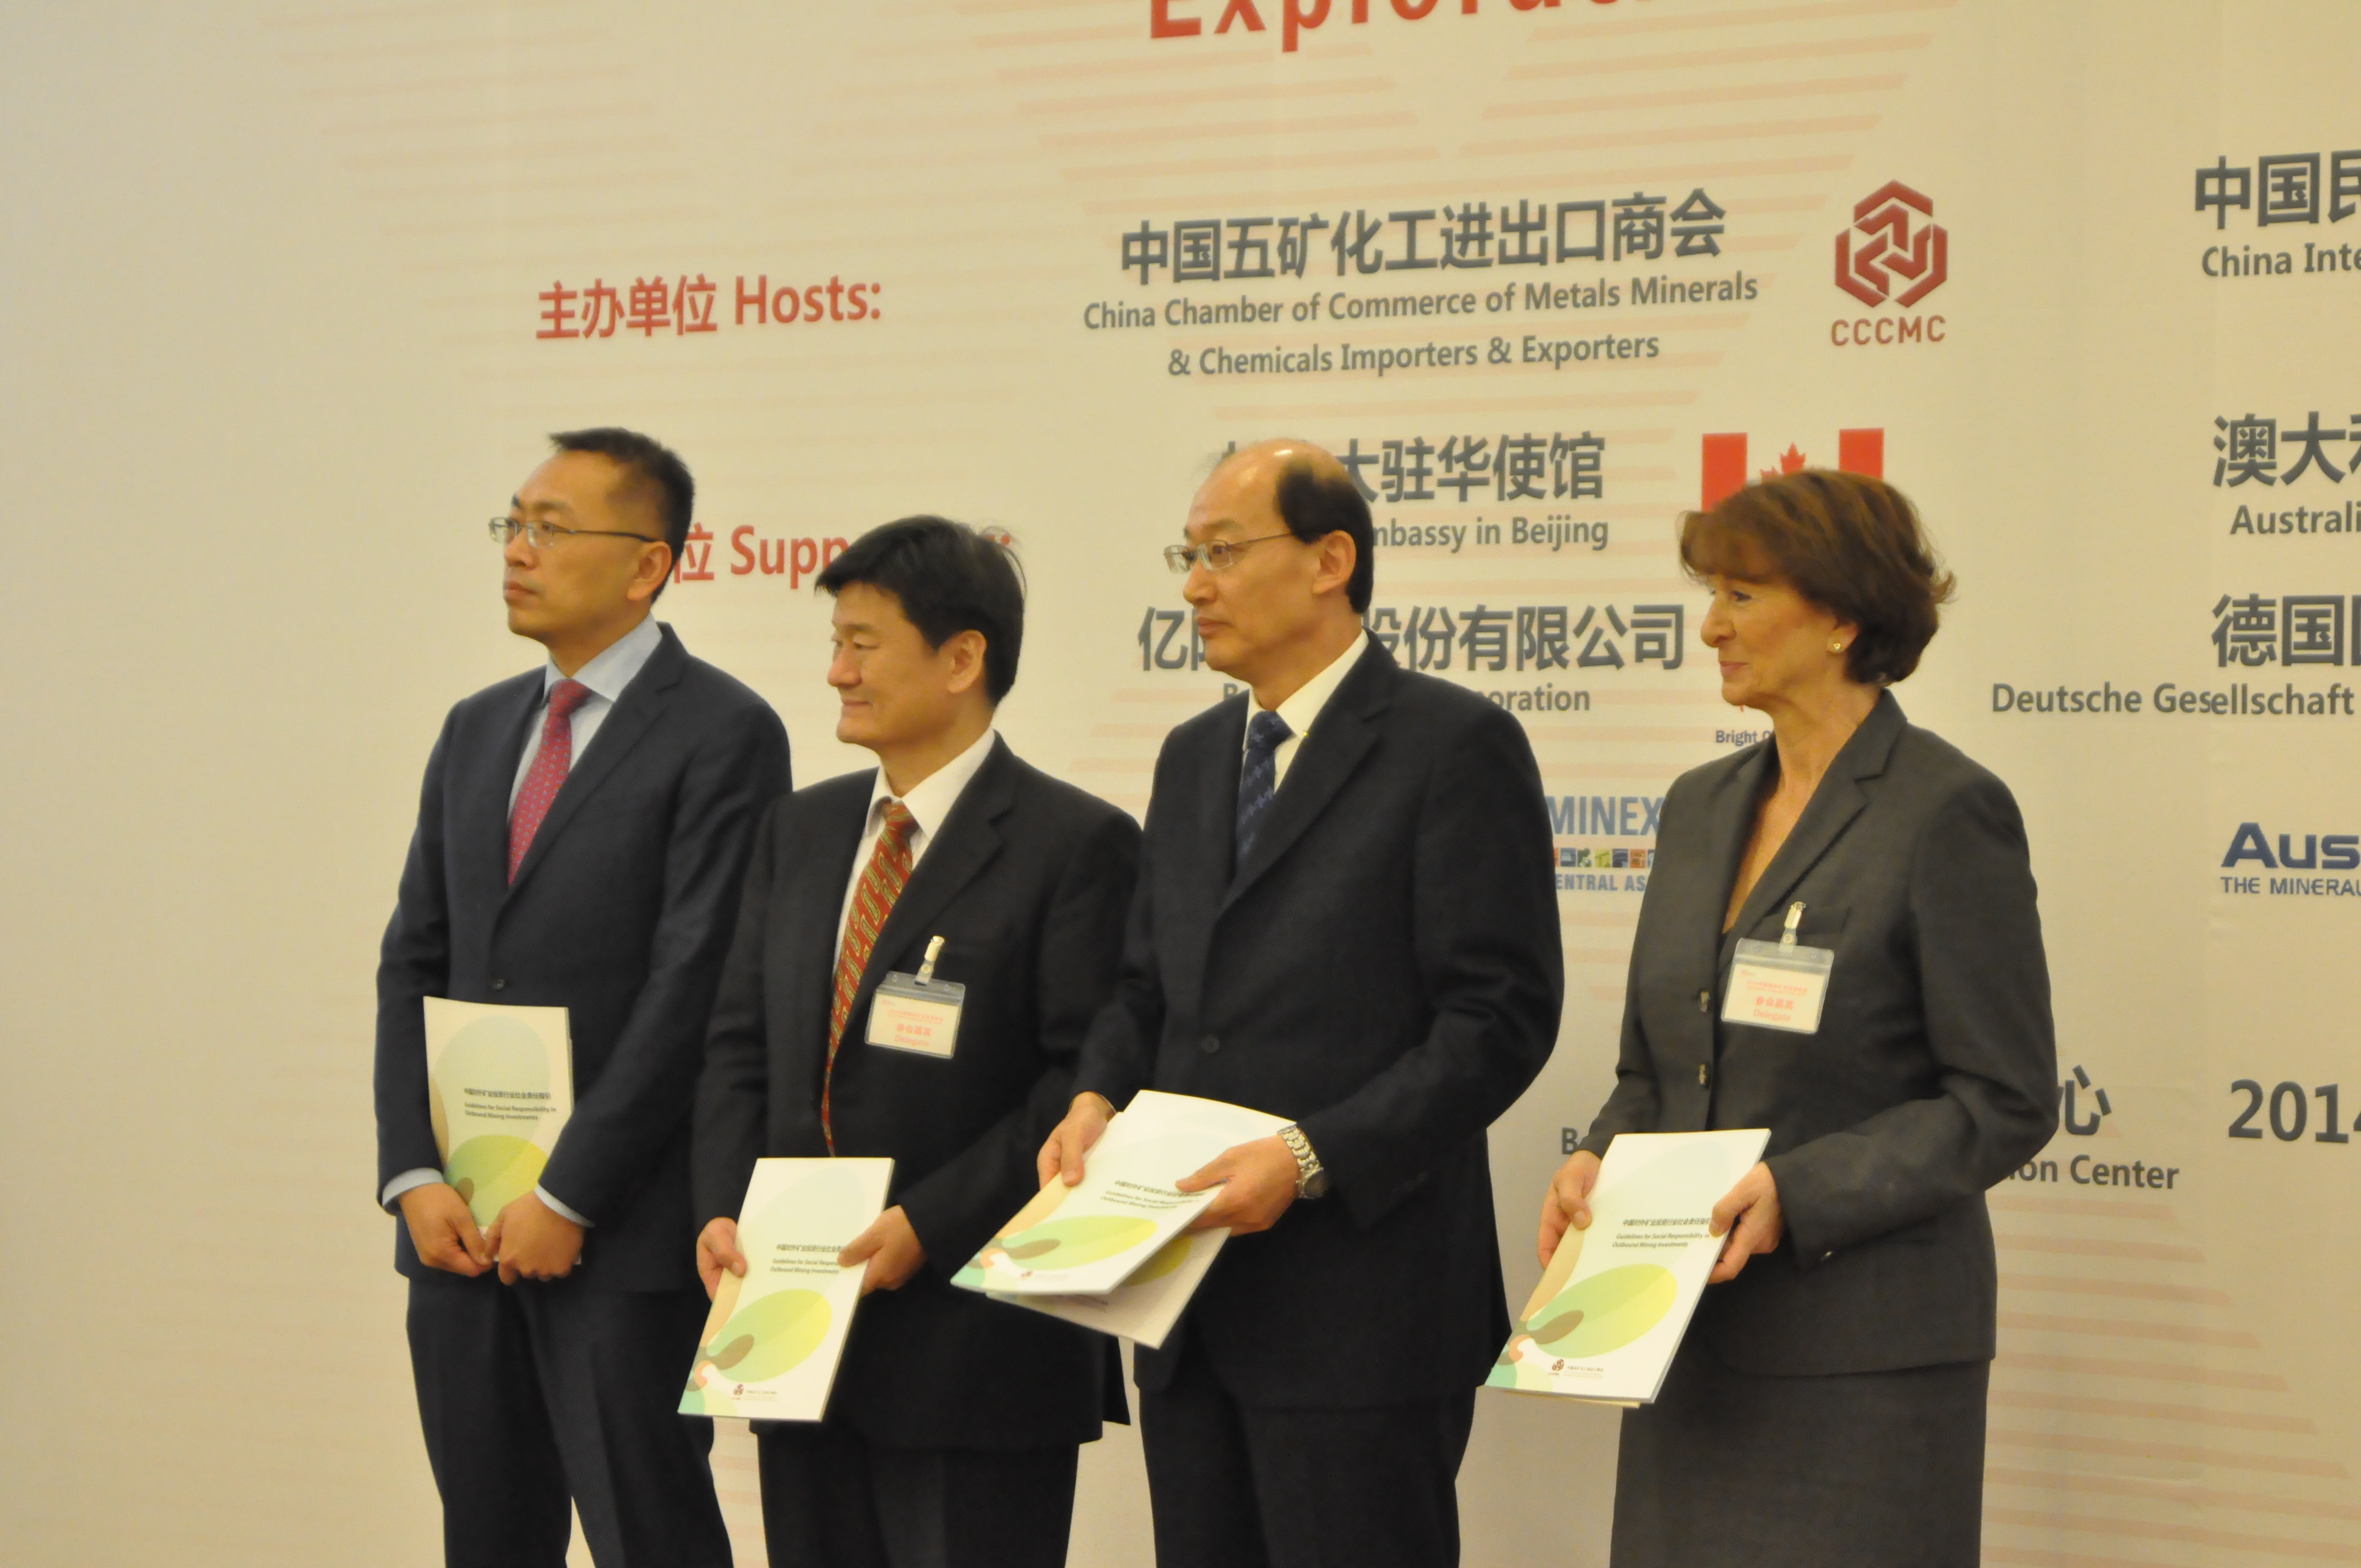 Launch of Guidelines for Responsible Outbound Mining Investment | 2014